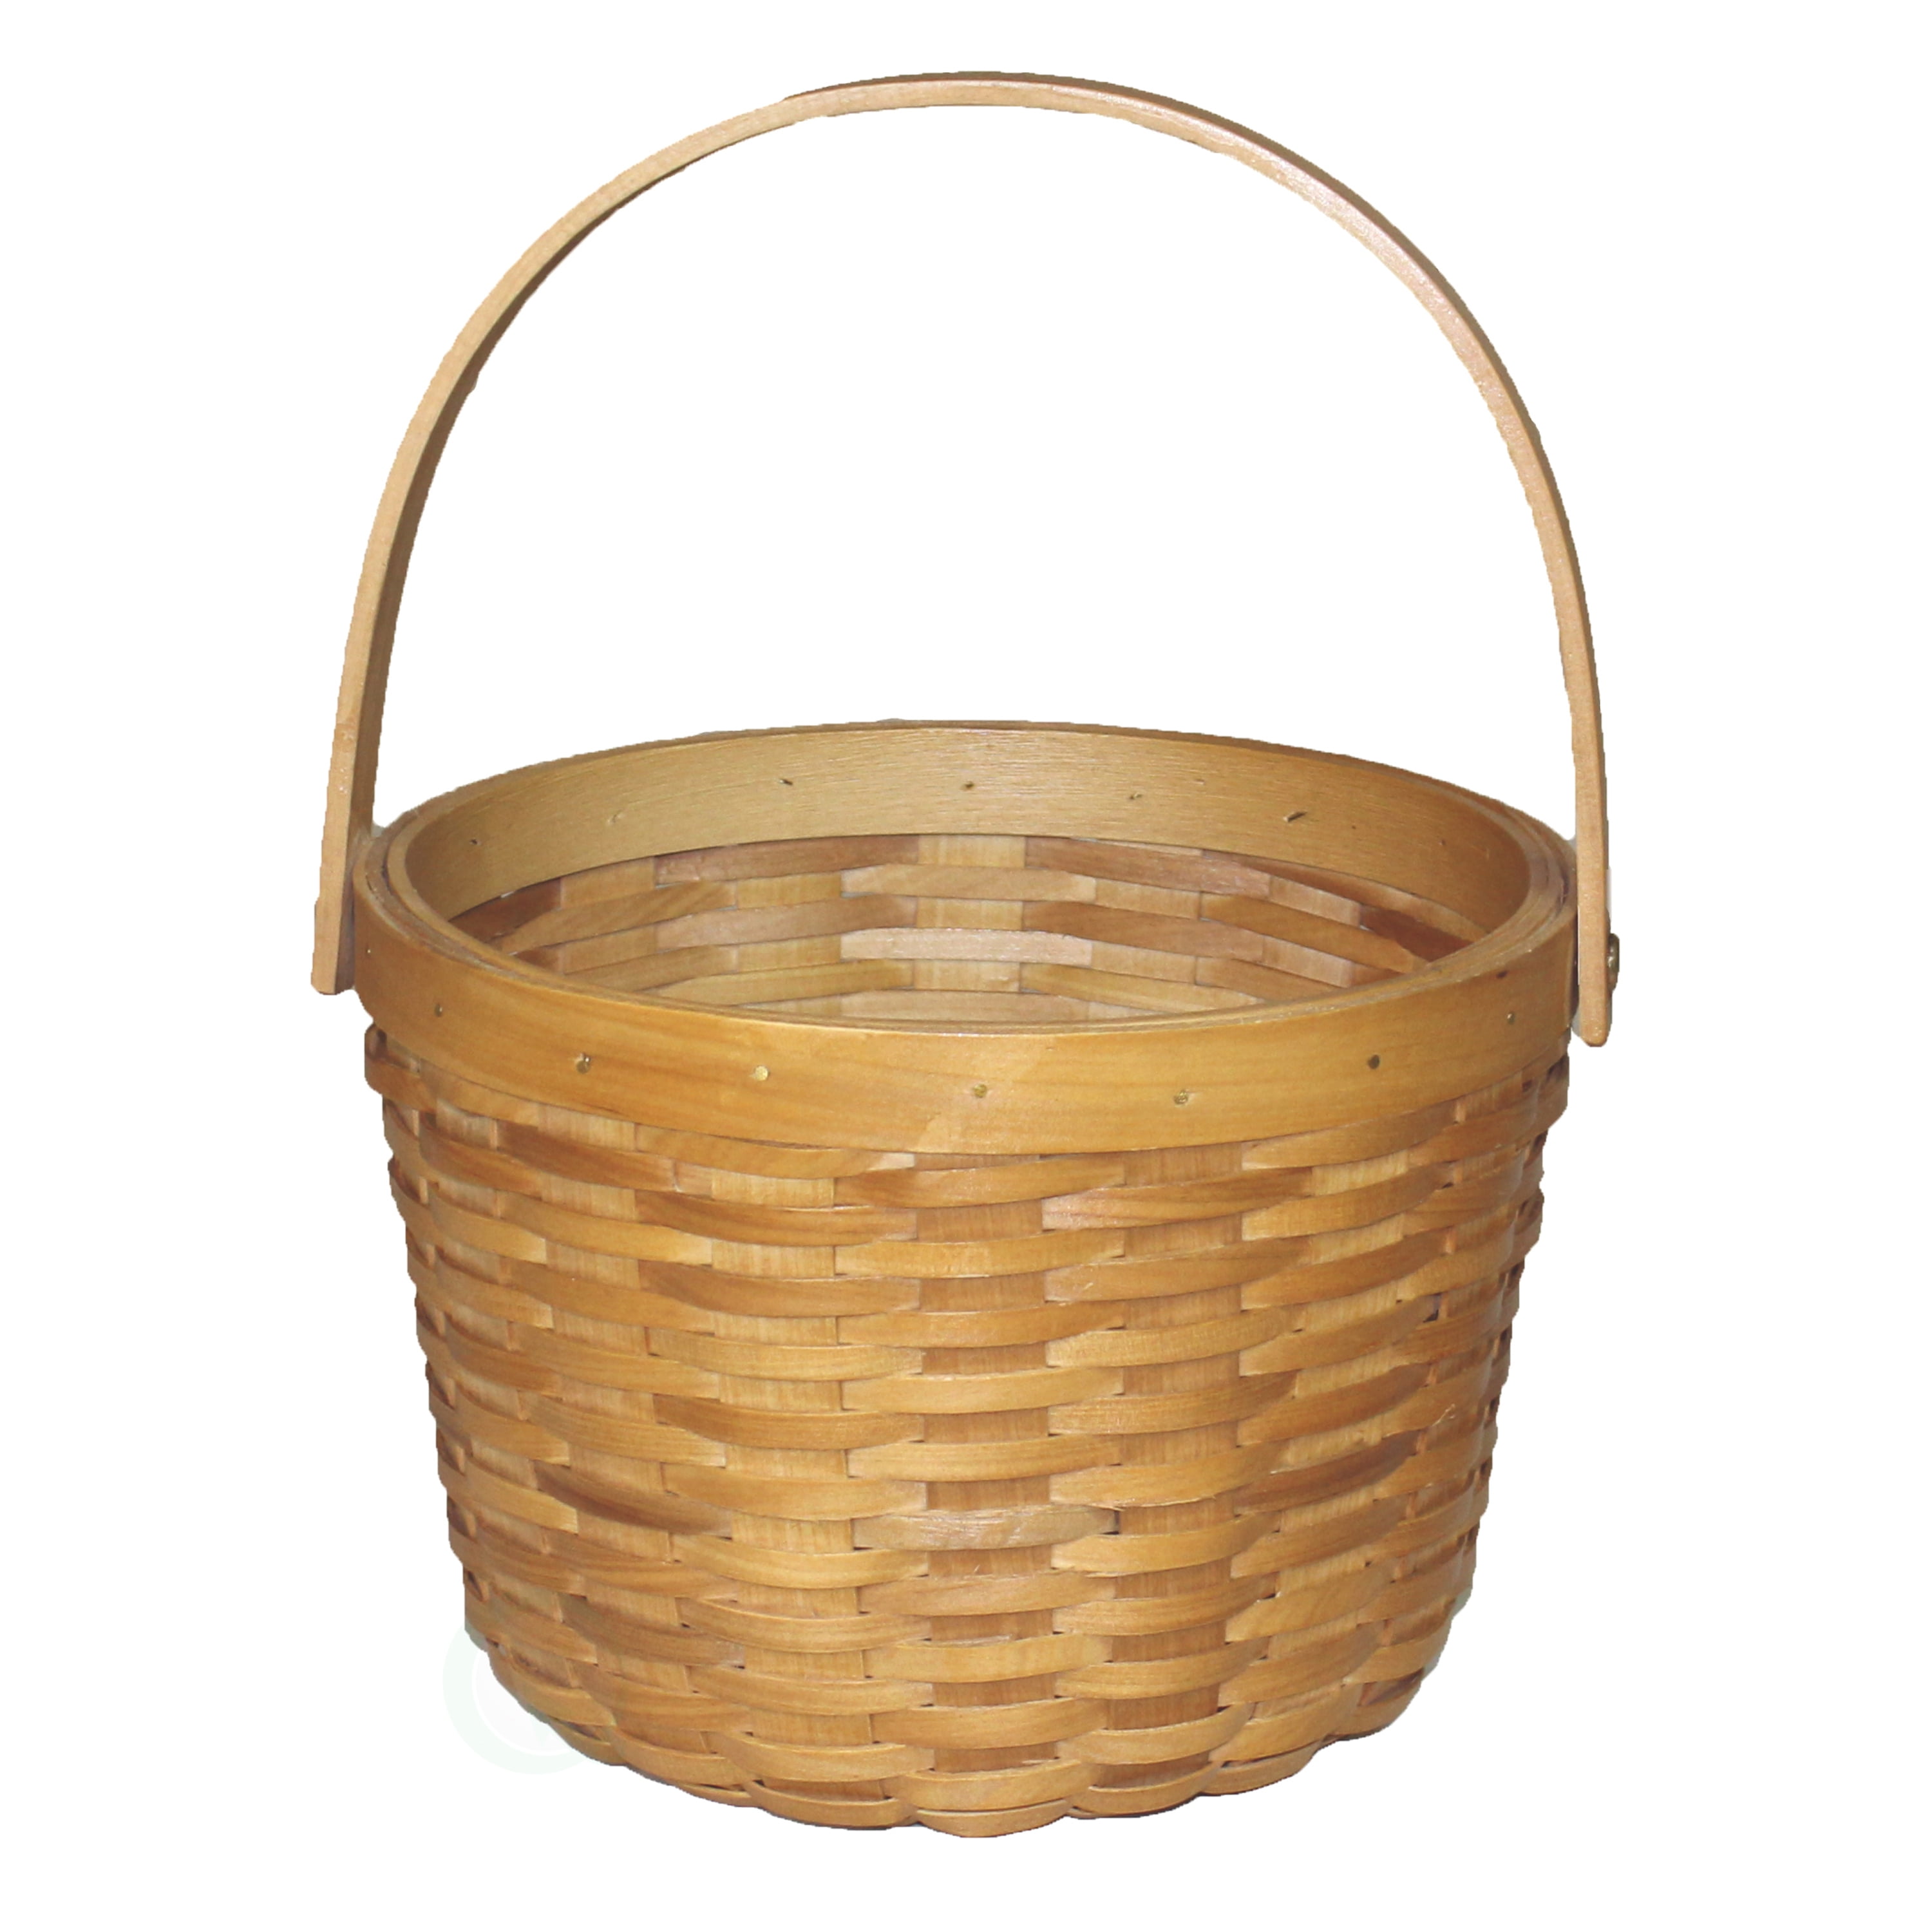 Hand Woven Flower Basket Wooden Woven Basket for Storage Wood Chip Picnic Basket Gift Basket Empty to Fill for Pantry Wedding Flower Closet Brown